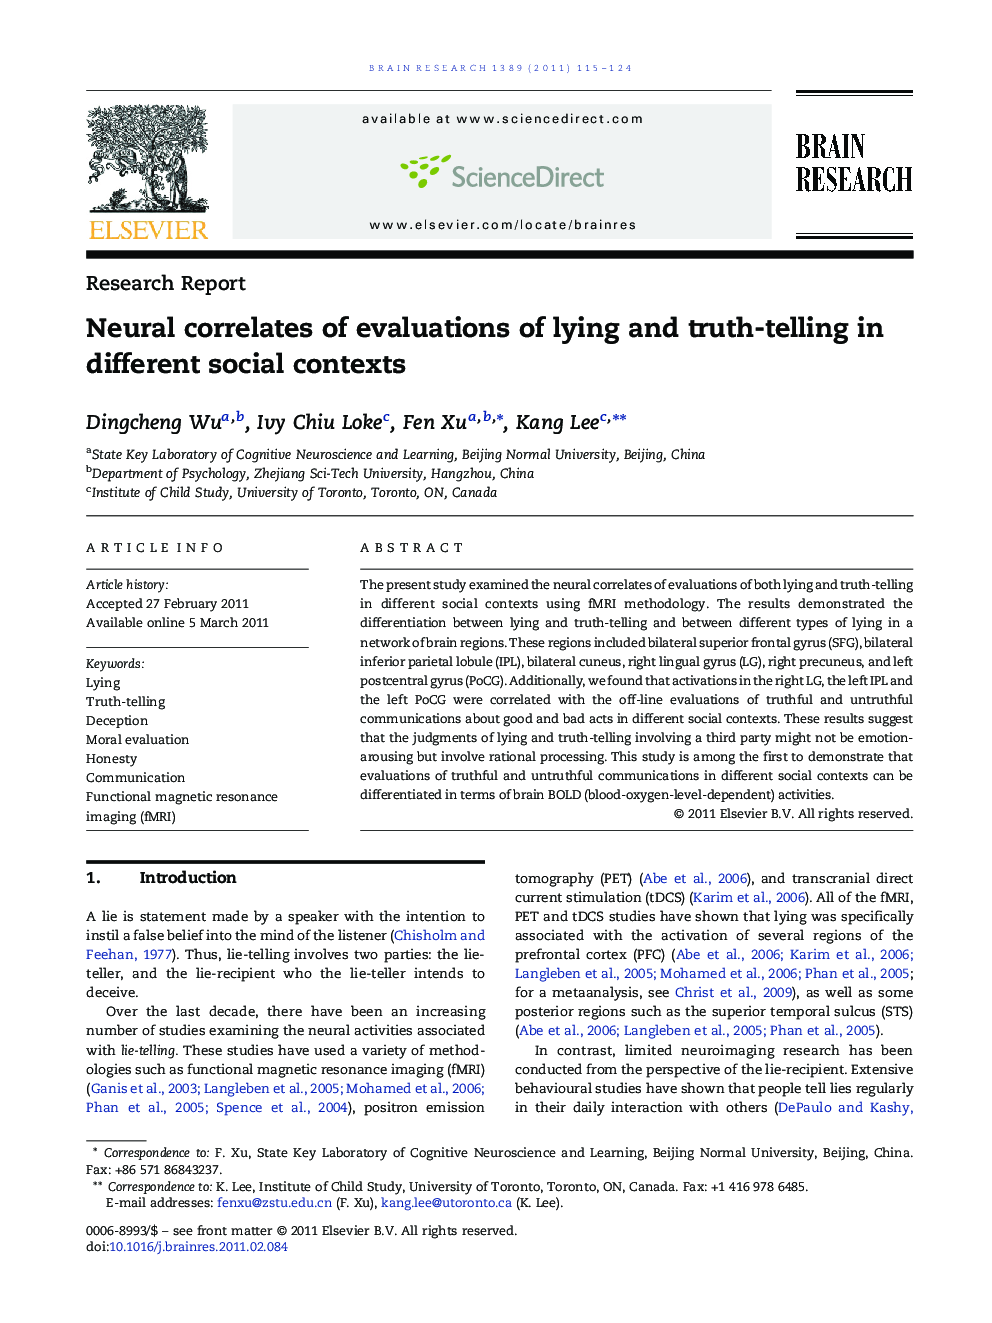 Neural correlates of evaluations of lying and truth-telling in different social contexts